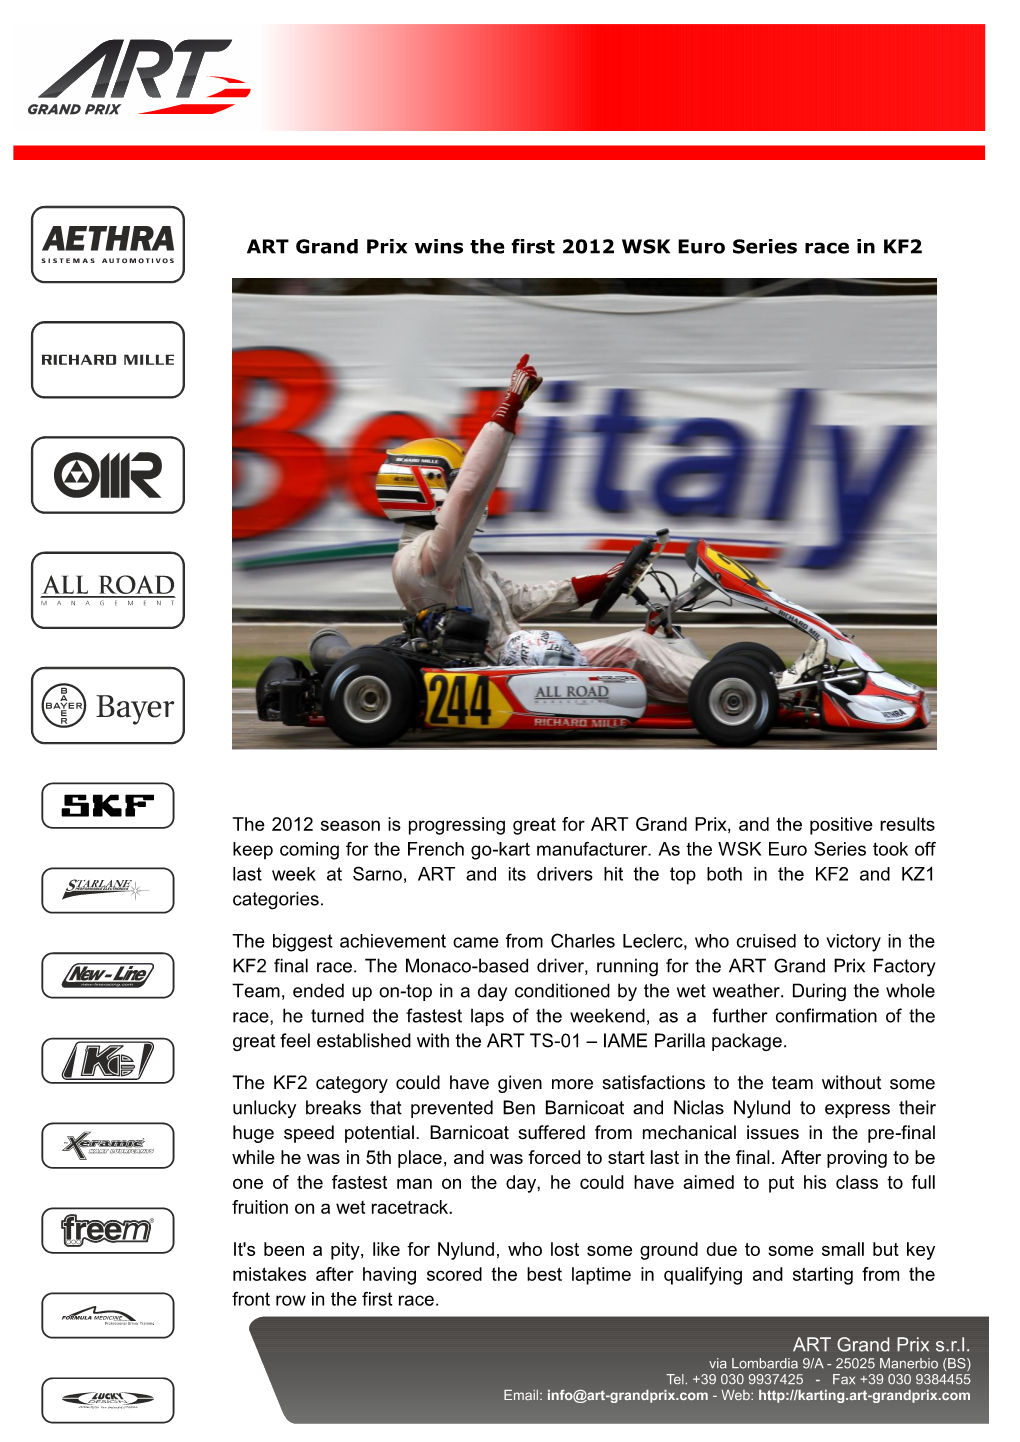 ART Grand Prix Wins the First 2012 WSK Euro Series Race in KF2